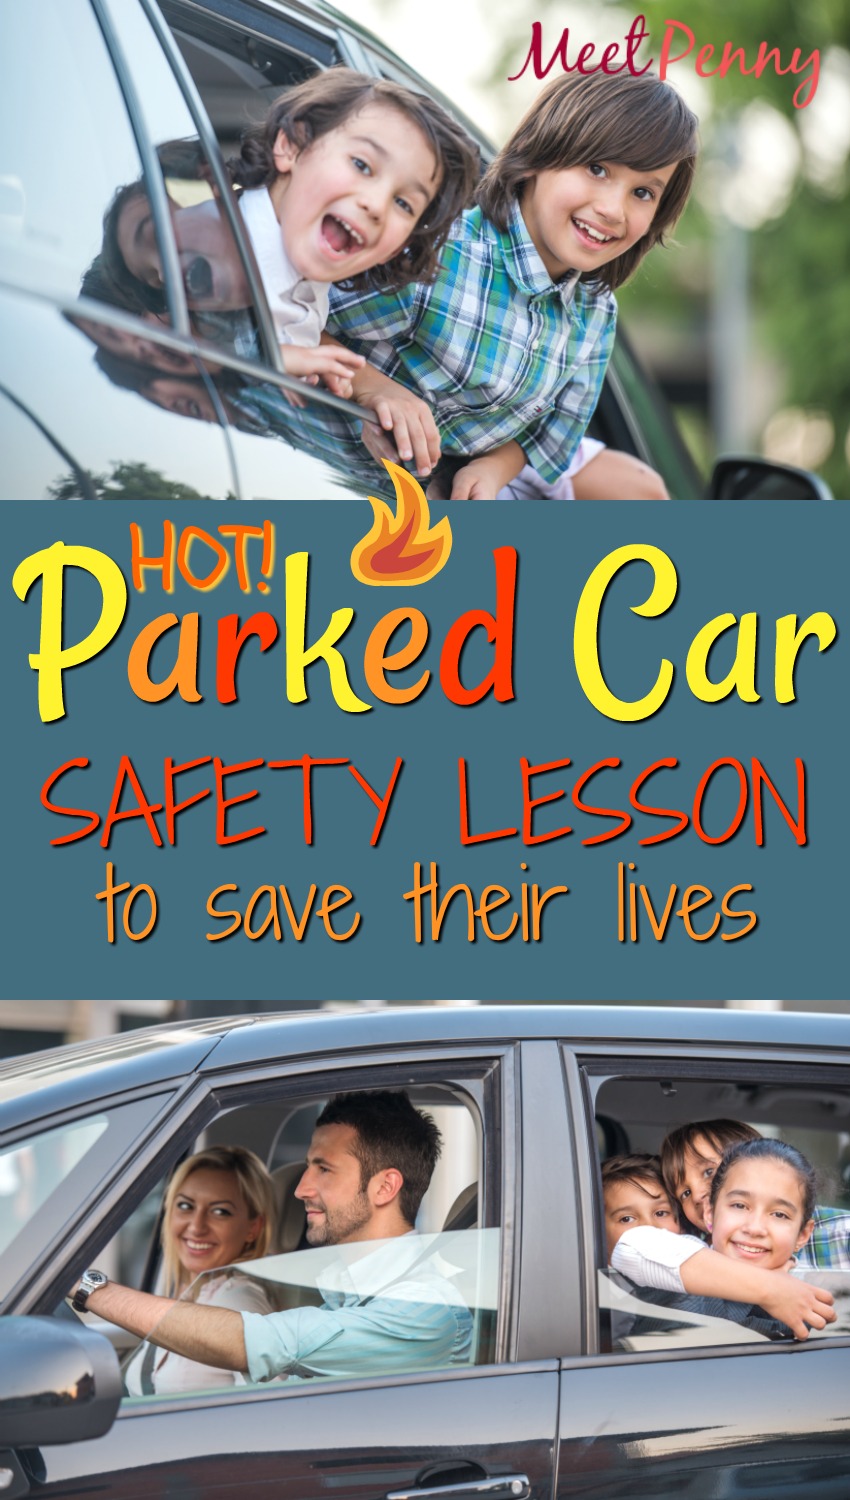 She locked her kids in a hot car on purpose. Should you do the same?